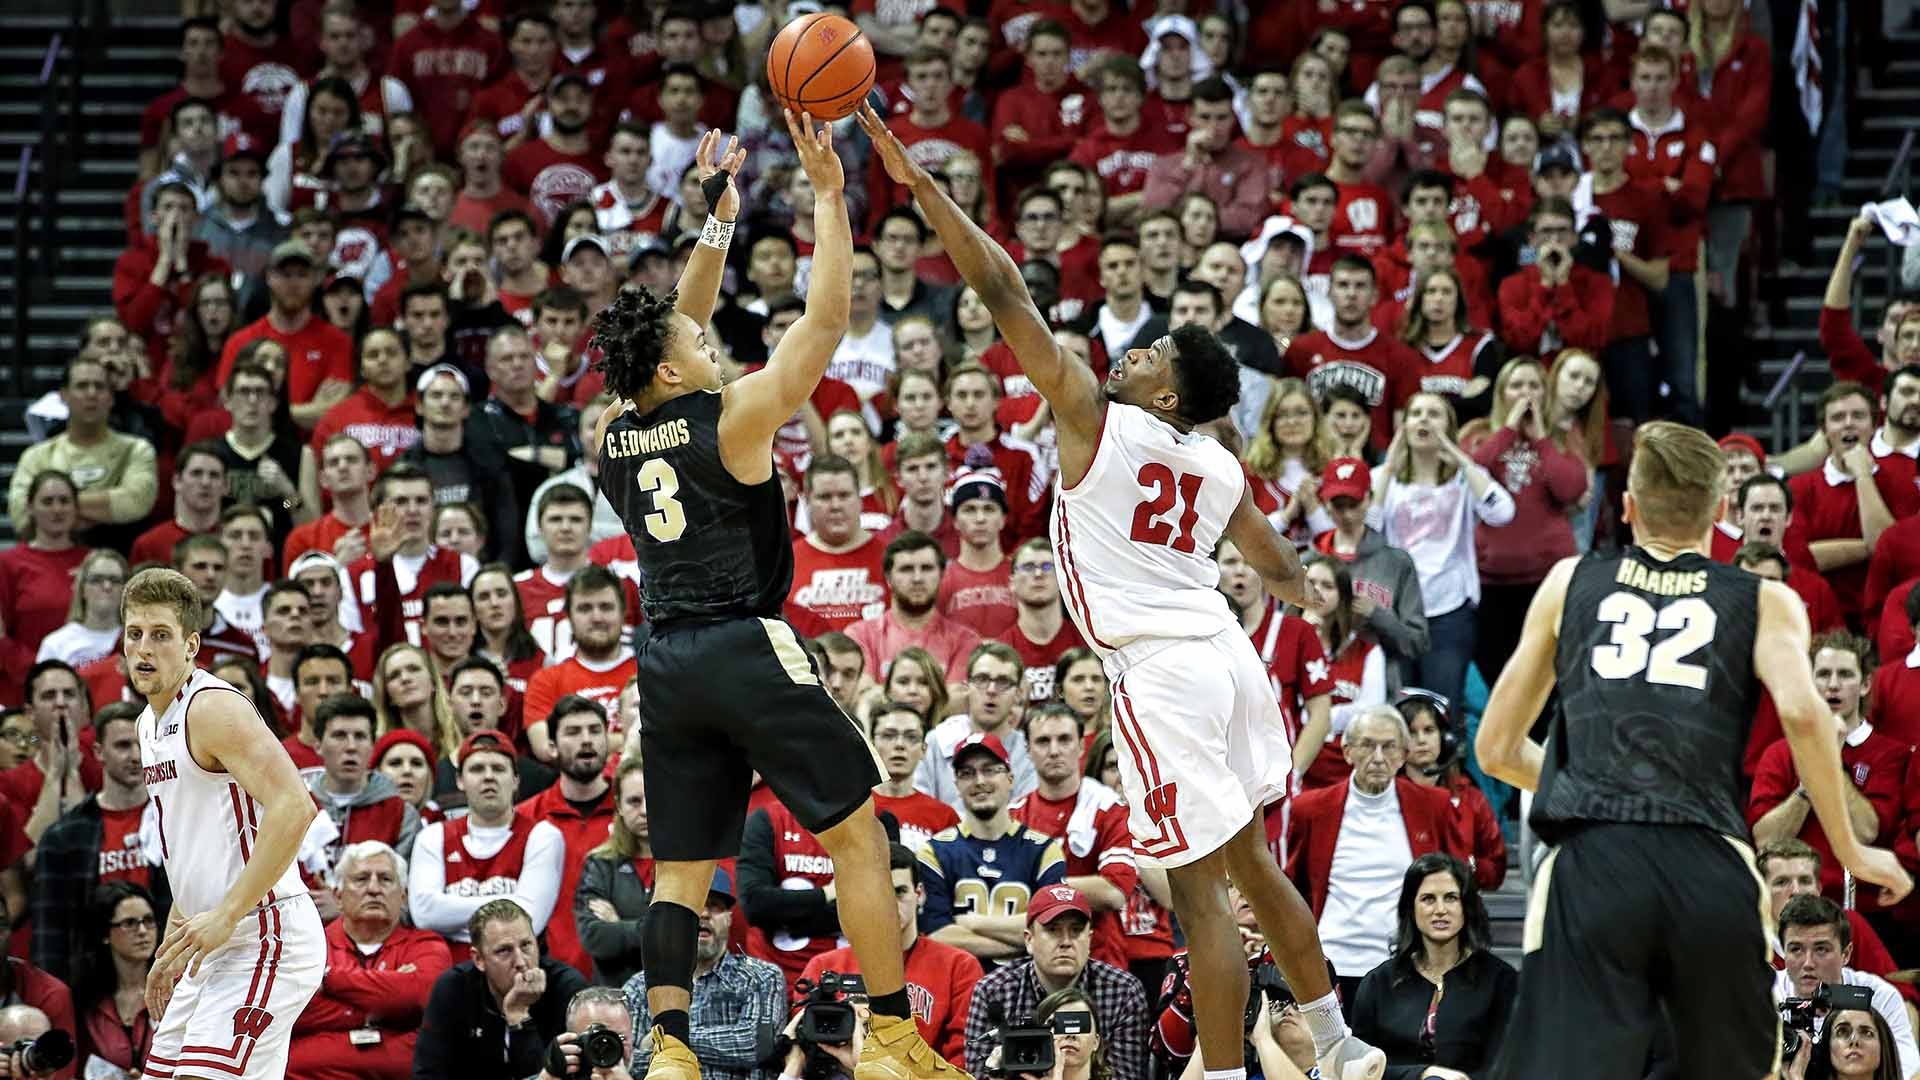 1920x1080 Khalil Iverson men's basketball defends a Purdue player at the Kohl Center  2017-18 season